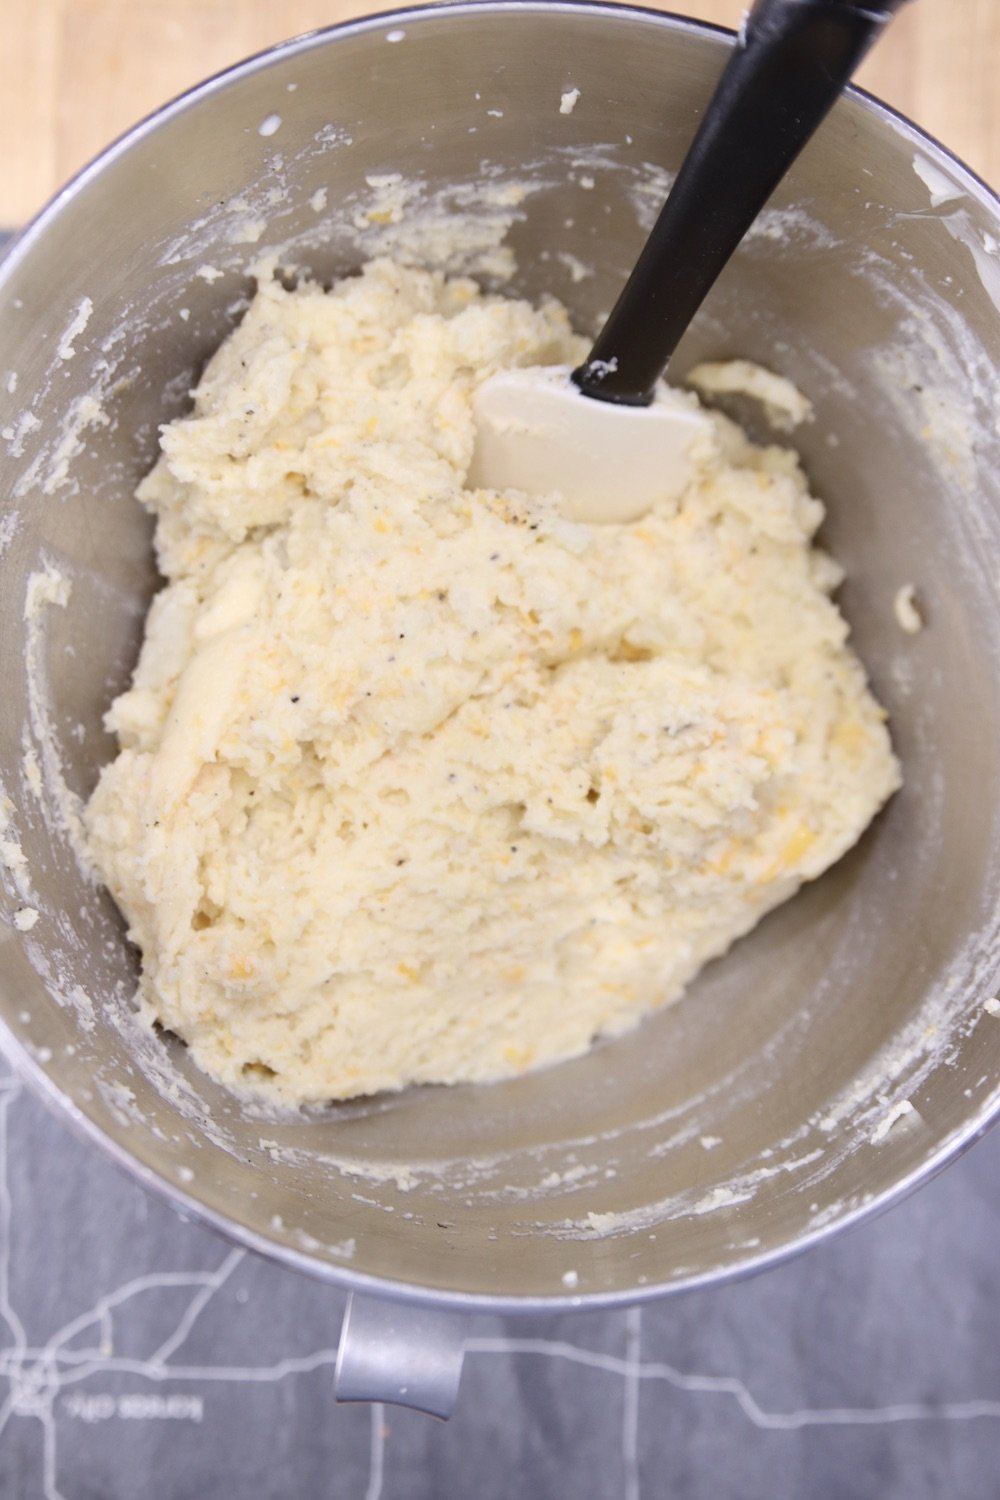 Mashed potato mixture in a bowl with cheese